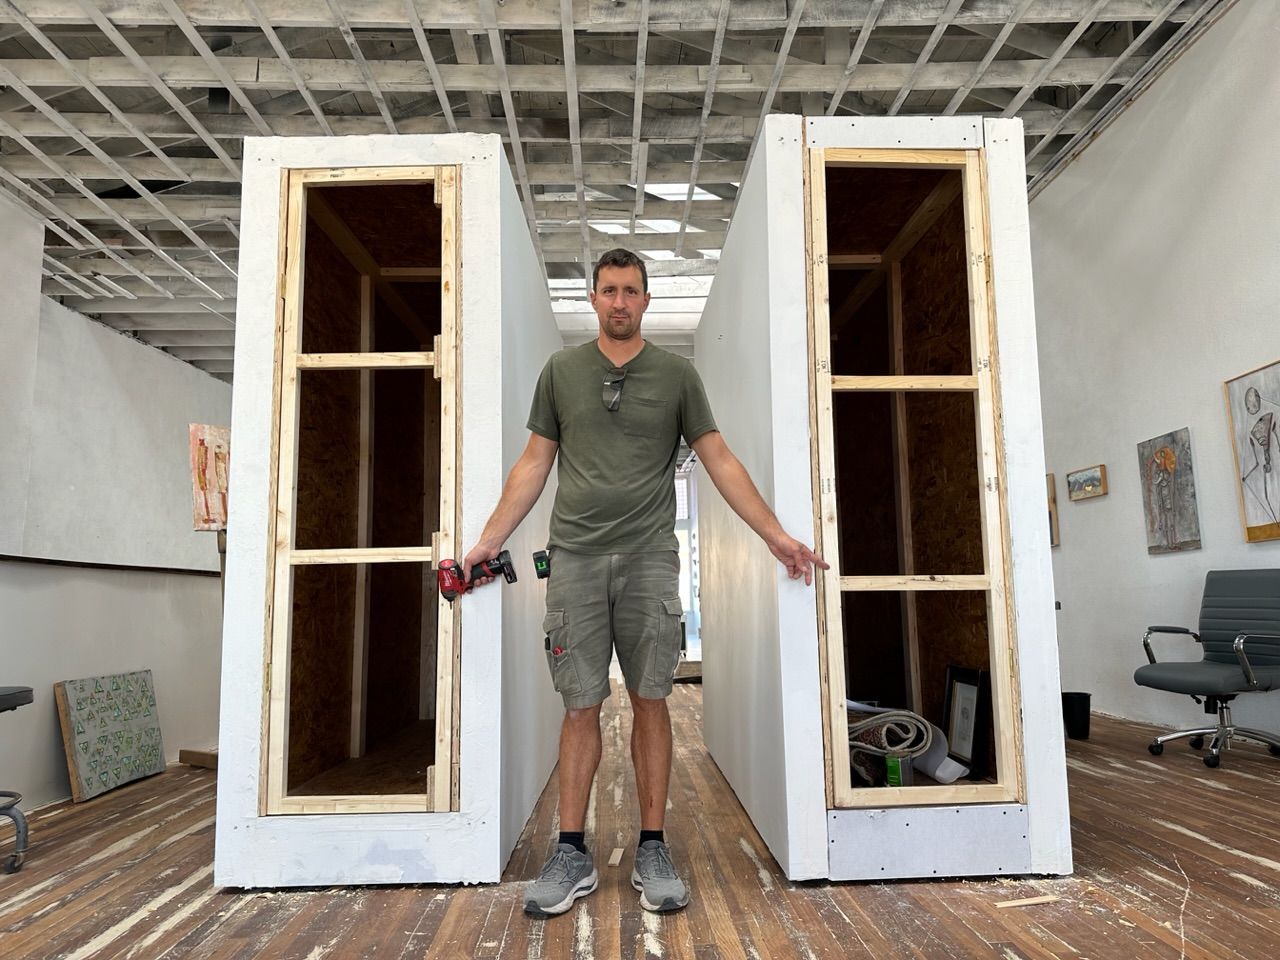 A man in a green shirt and shorts stands holding a red drill pointing to two door frames on while movable walls in a gallery space with a wood floor